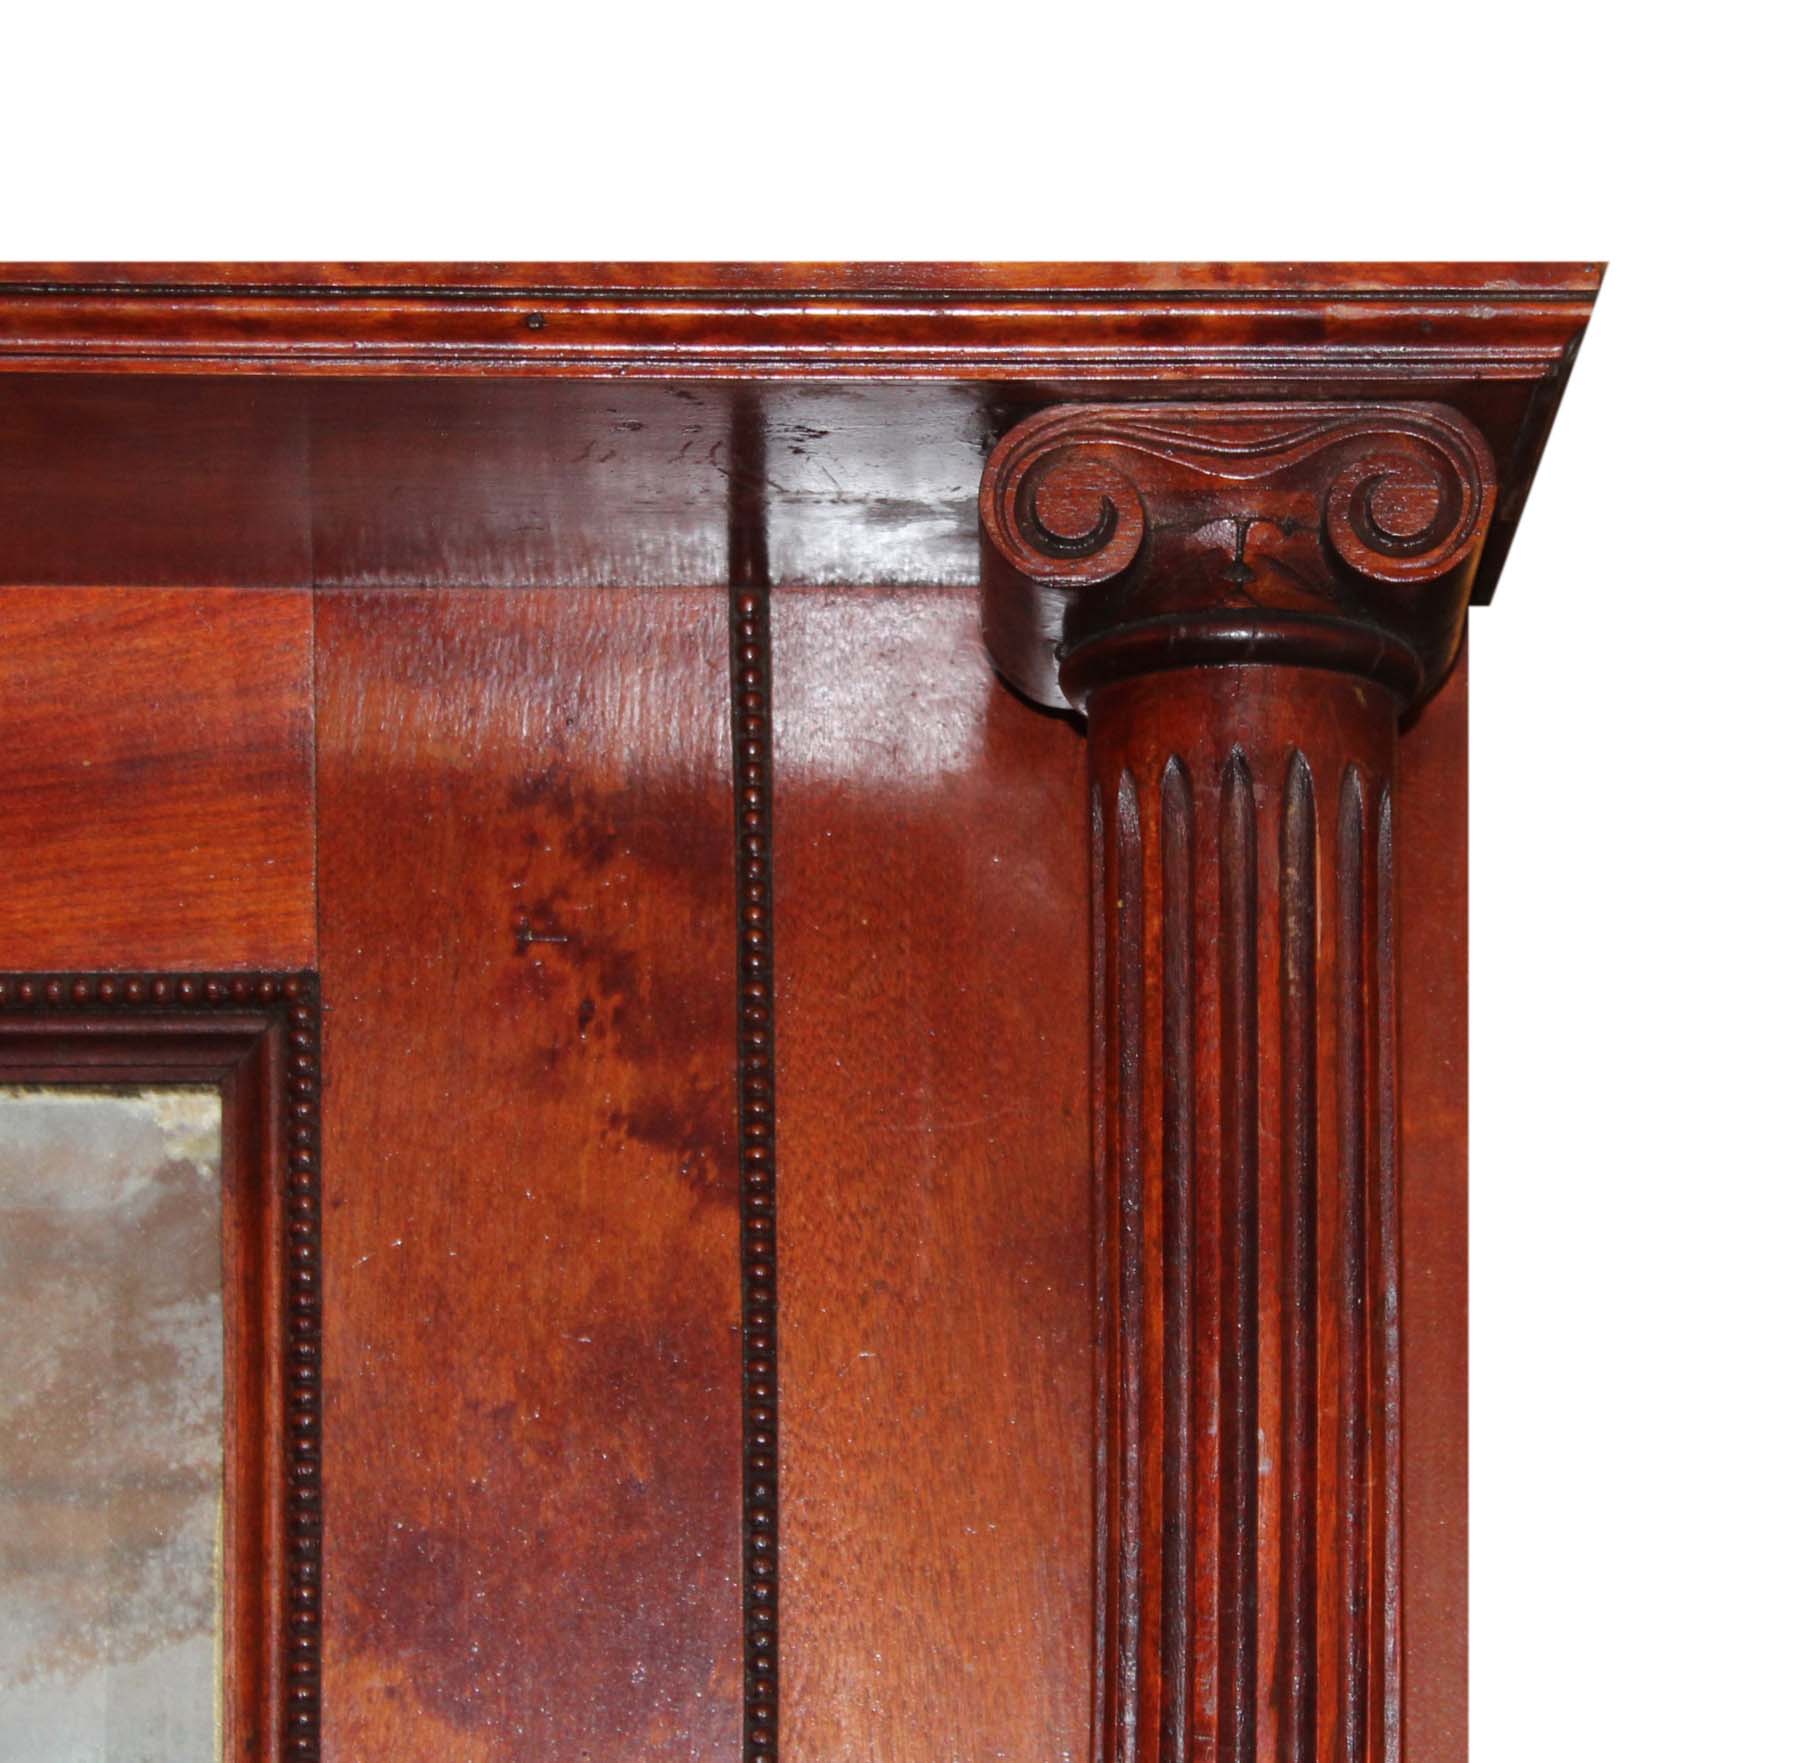 SOLD Antique Fireplace Mantel with Beveled Mirror, c. 1905-68900